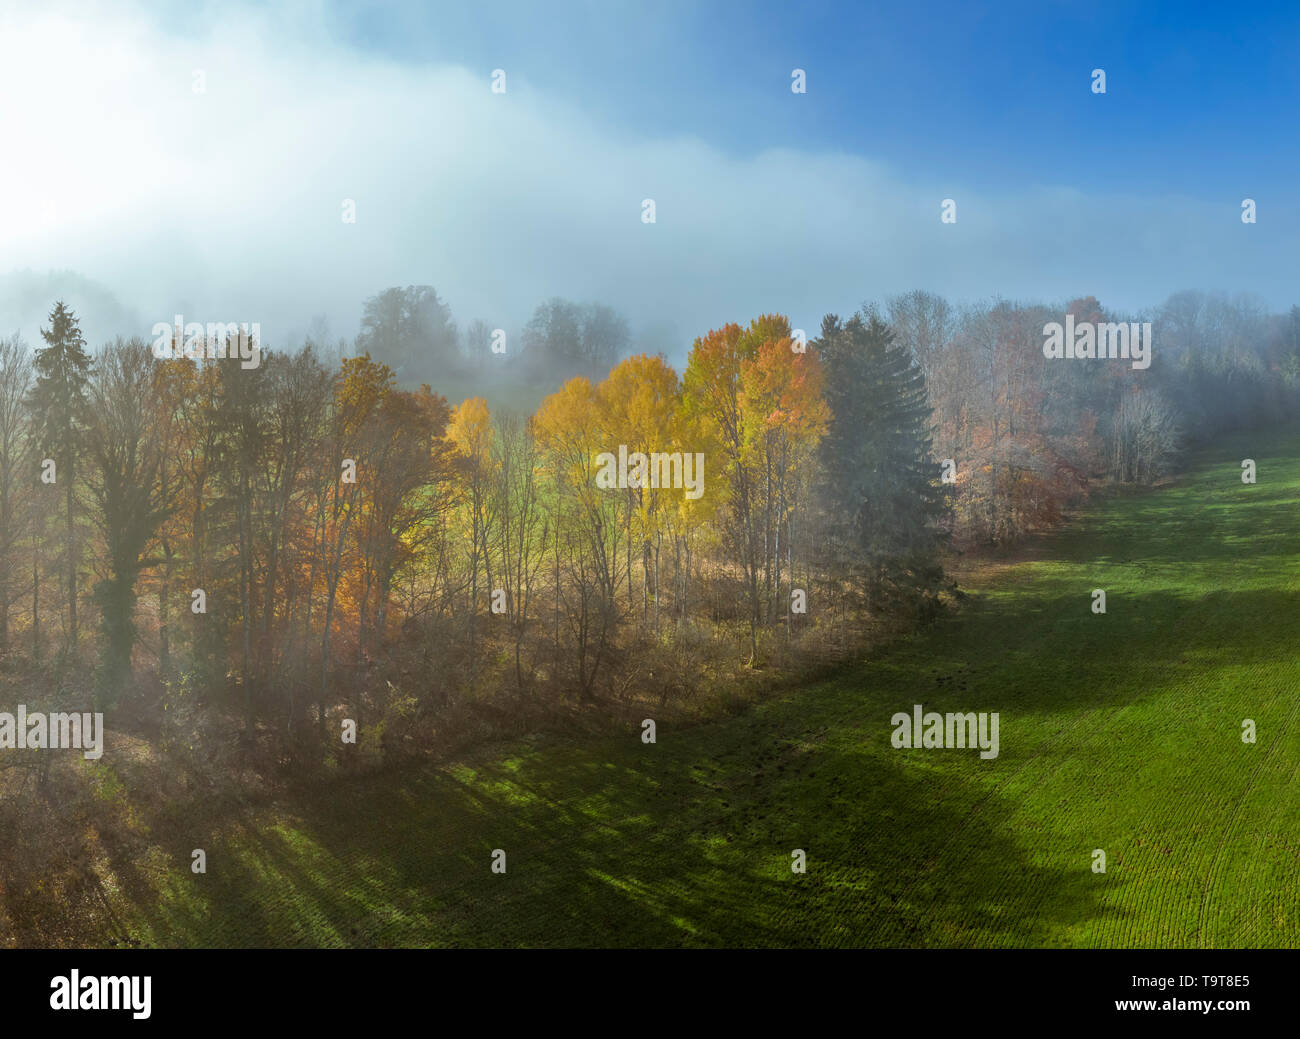 Trees on a meadow in the morning fog, Aidenried, Upper Bavaria, Bavaria, Germany, Europe, Bäume auf einer Wiese im Morgennebel, Oberbayern, Bayern, De Stock Photo